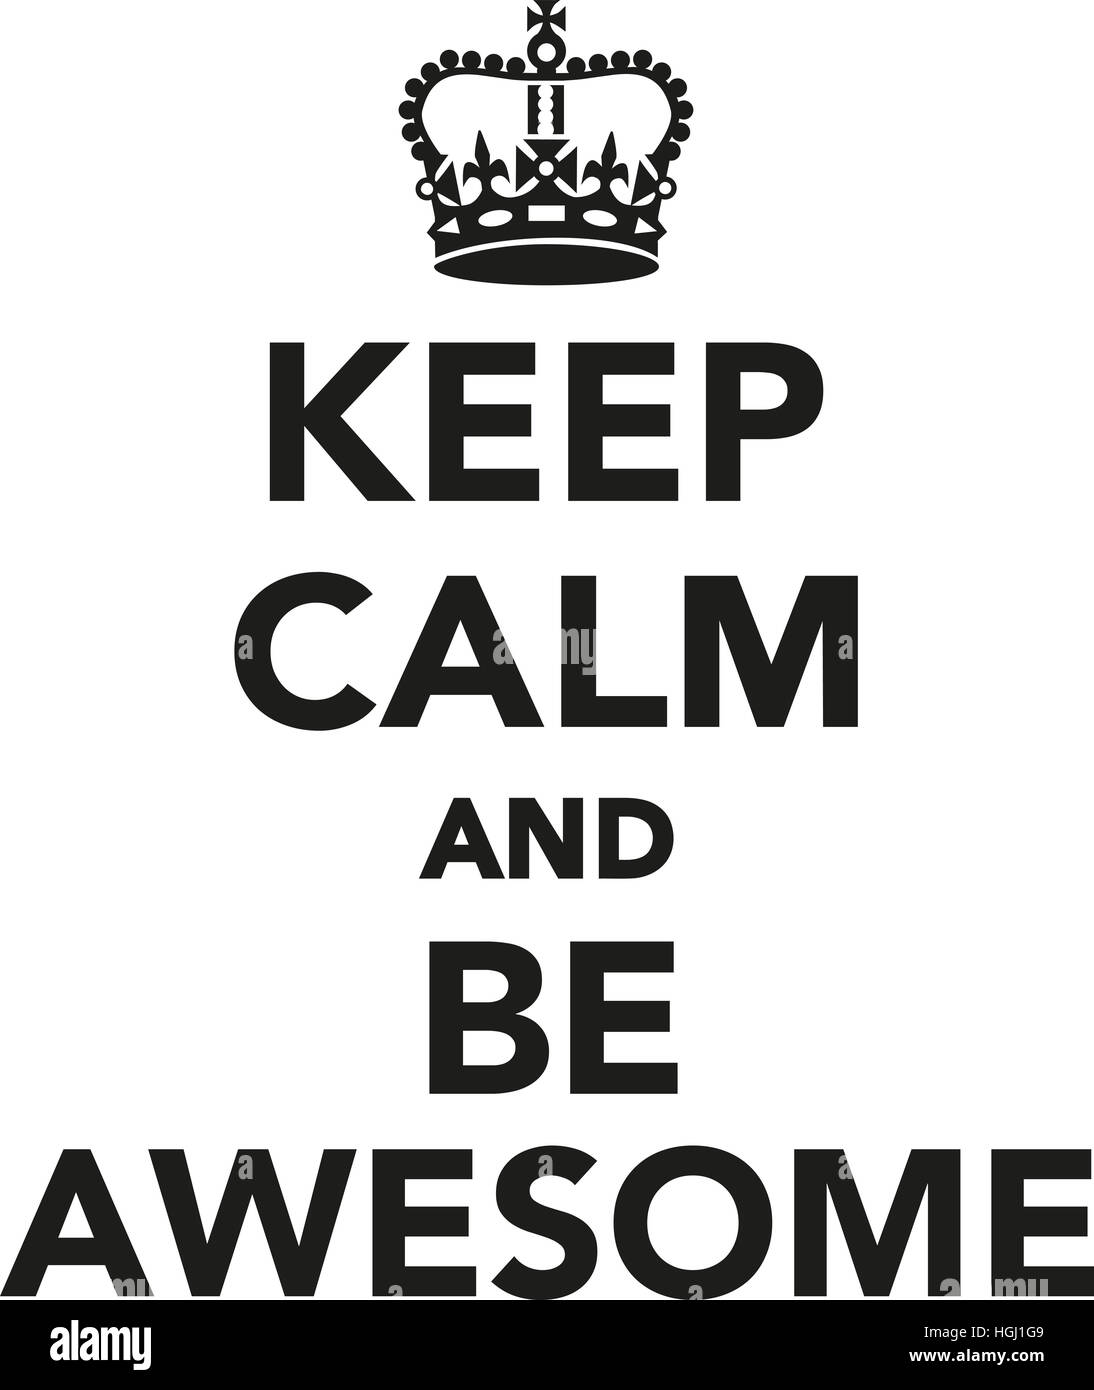 Keep calm and be awesome Stock Photo